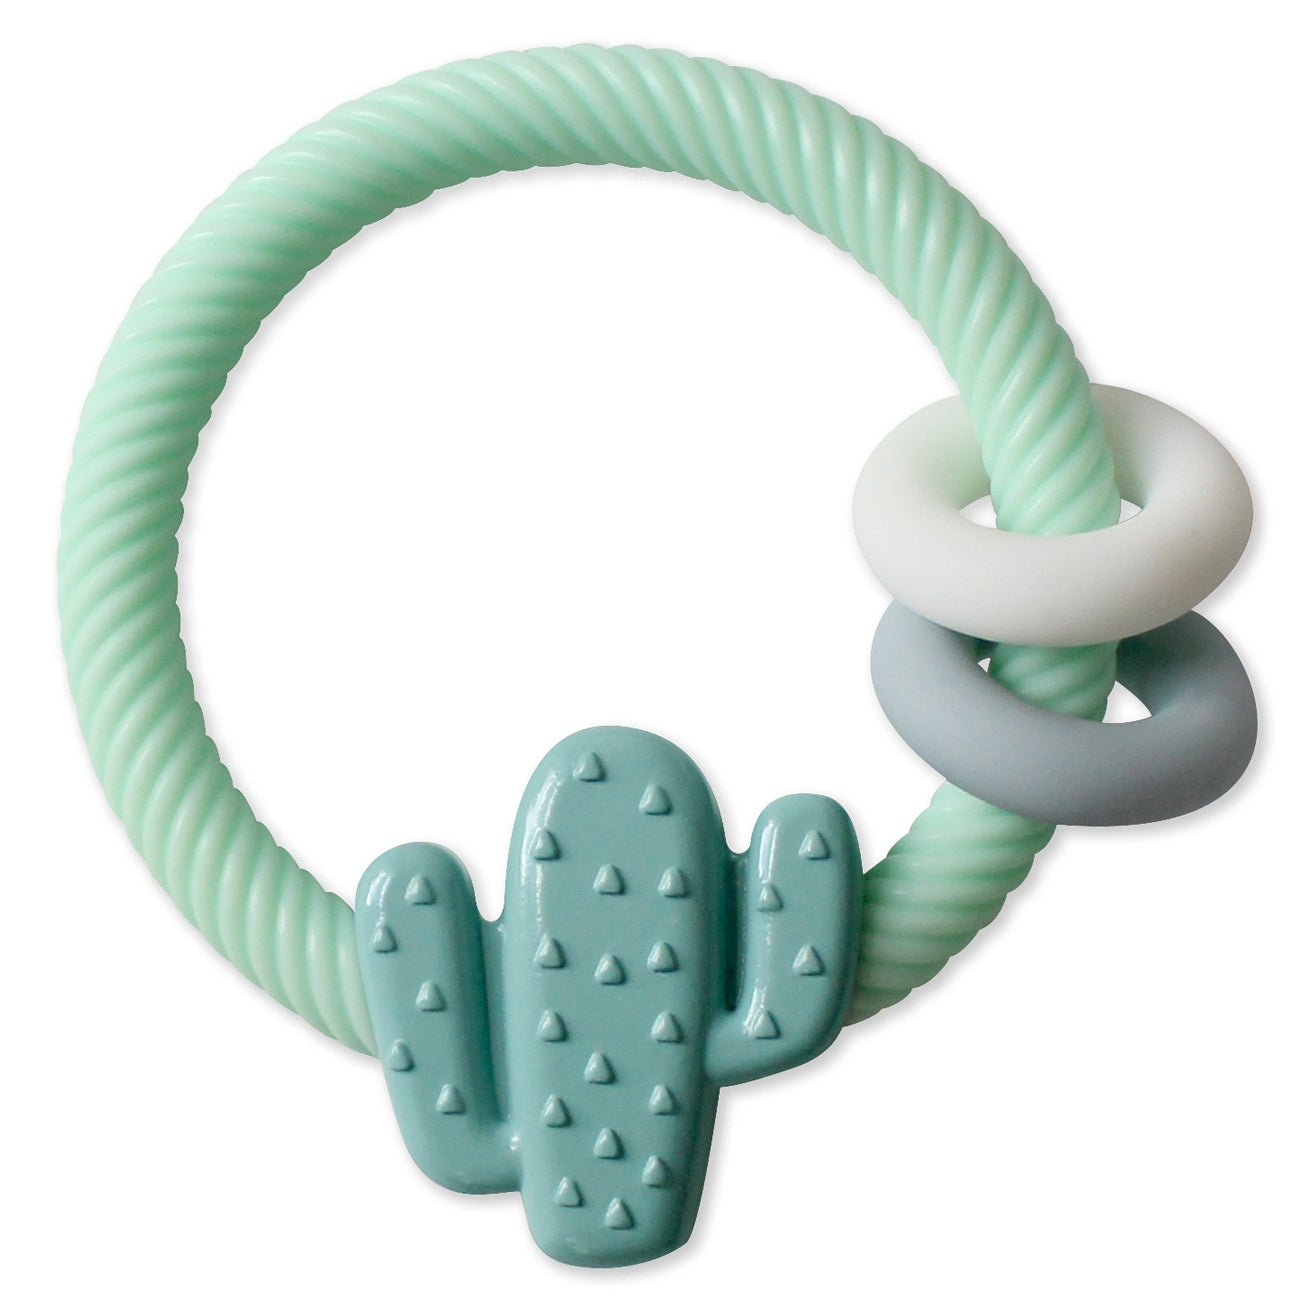 Ritzy Rattle Silicone Teether Rattle - Cactus Baby Accessories Itzy Ritzy   